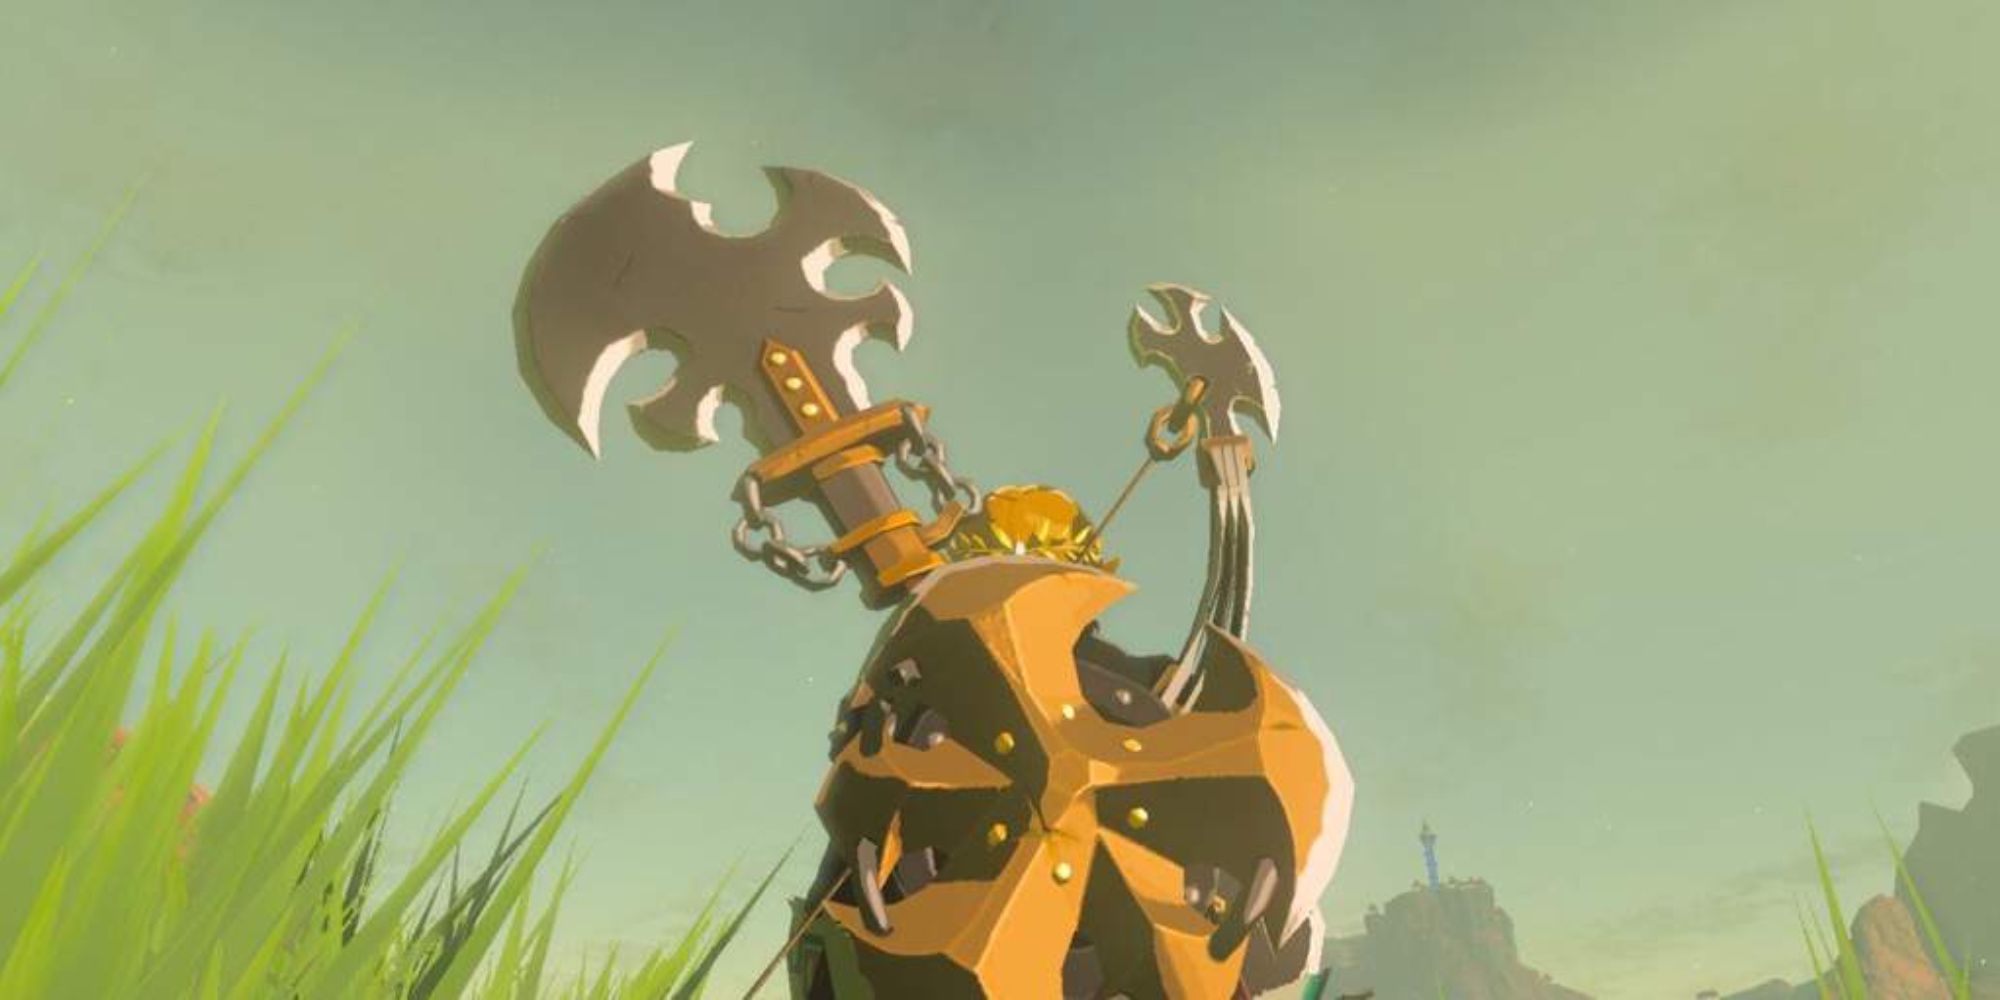 Link with a Savage Lynel Spear and Shield